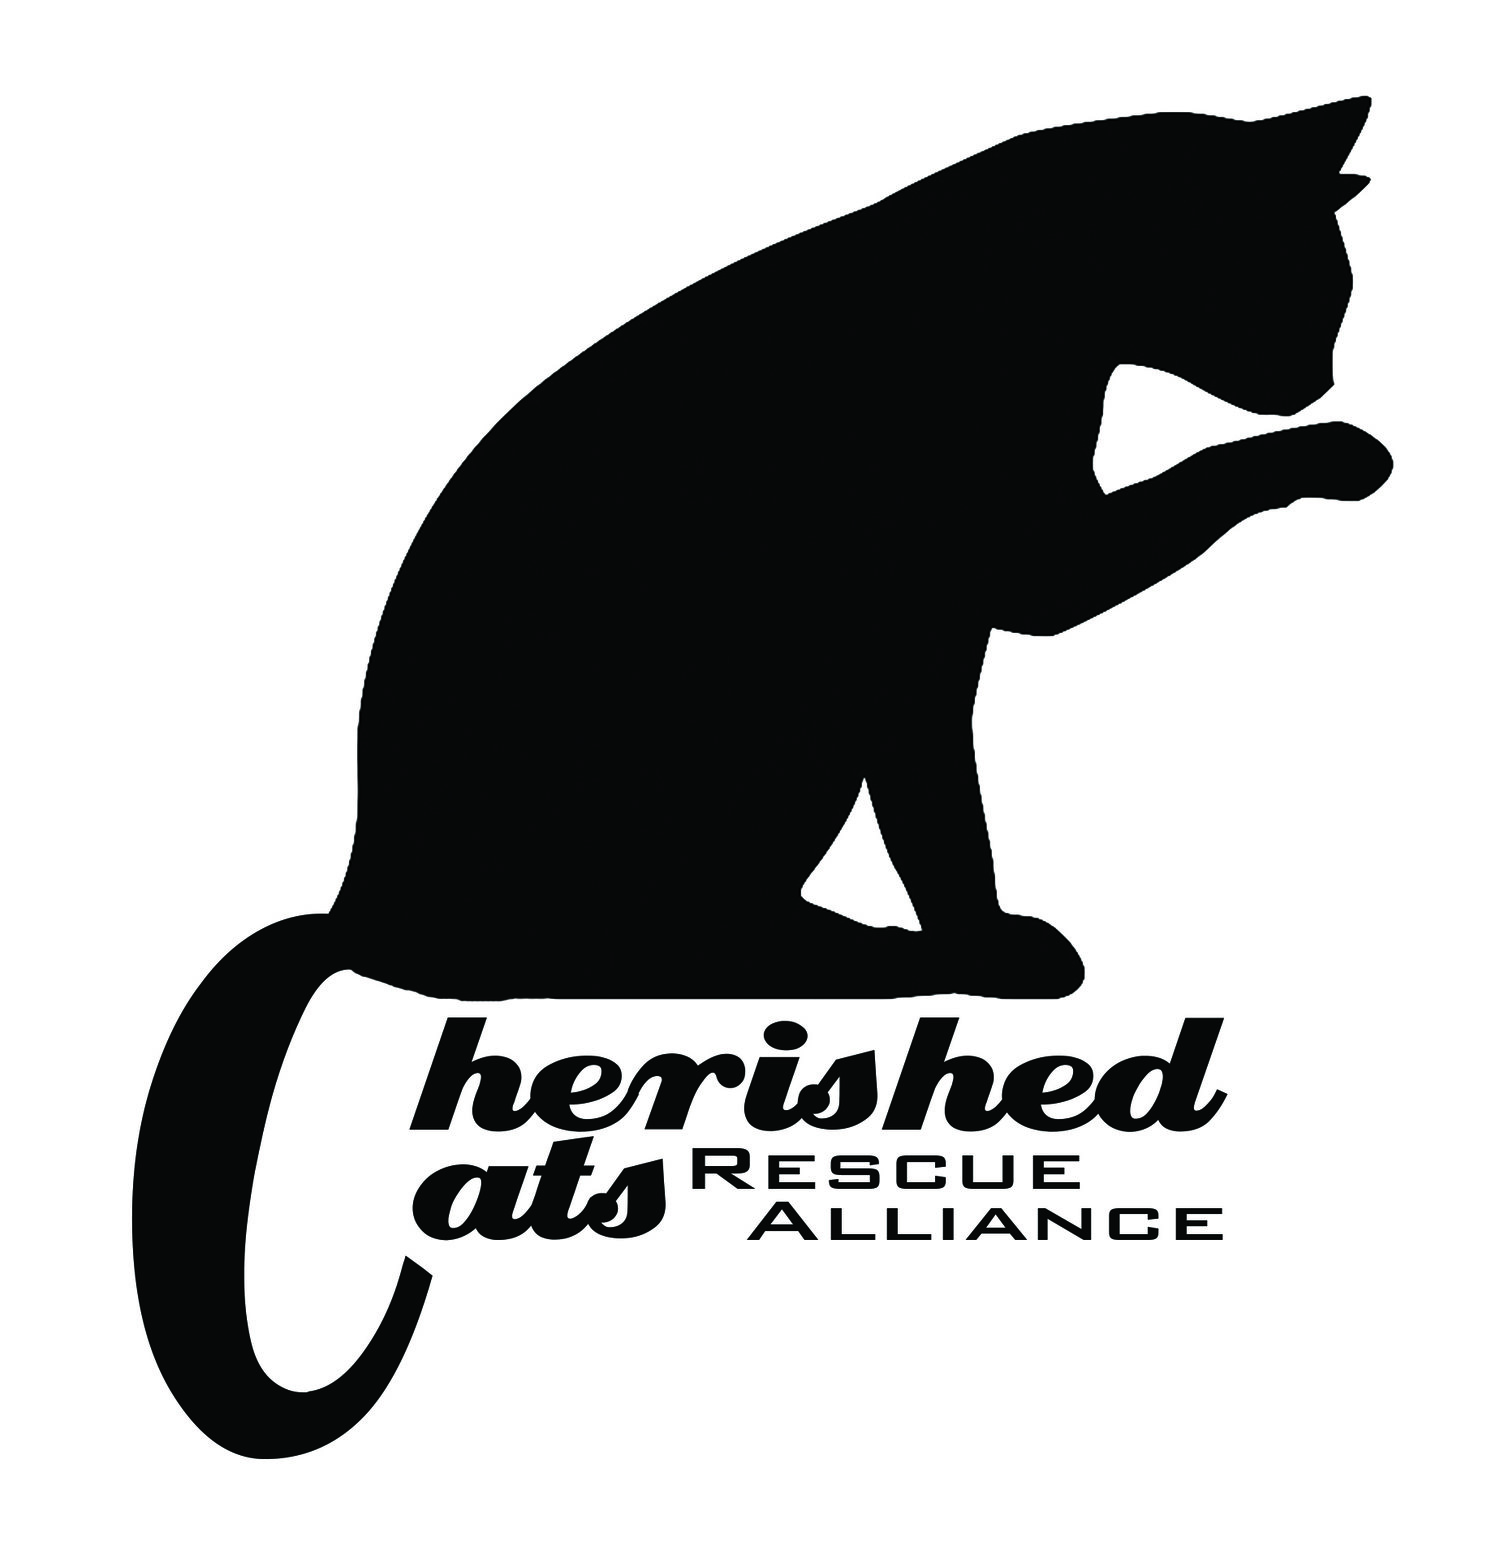 Cherished Cats Rescue Alliance